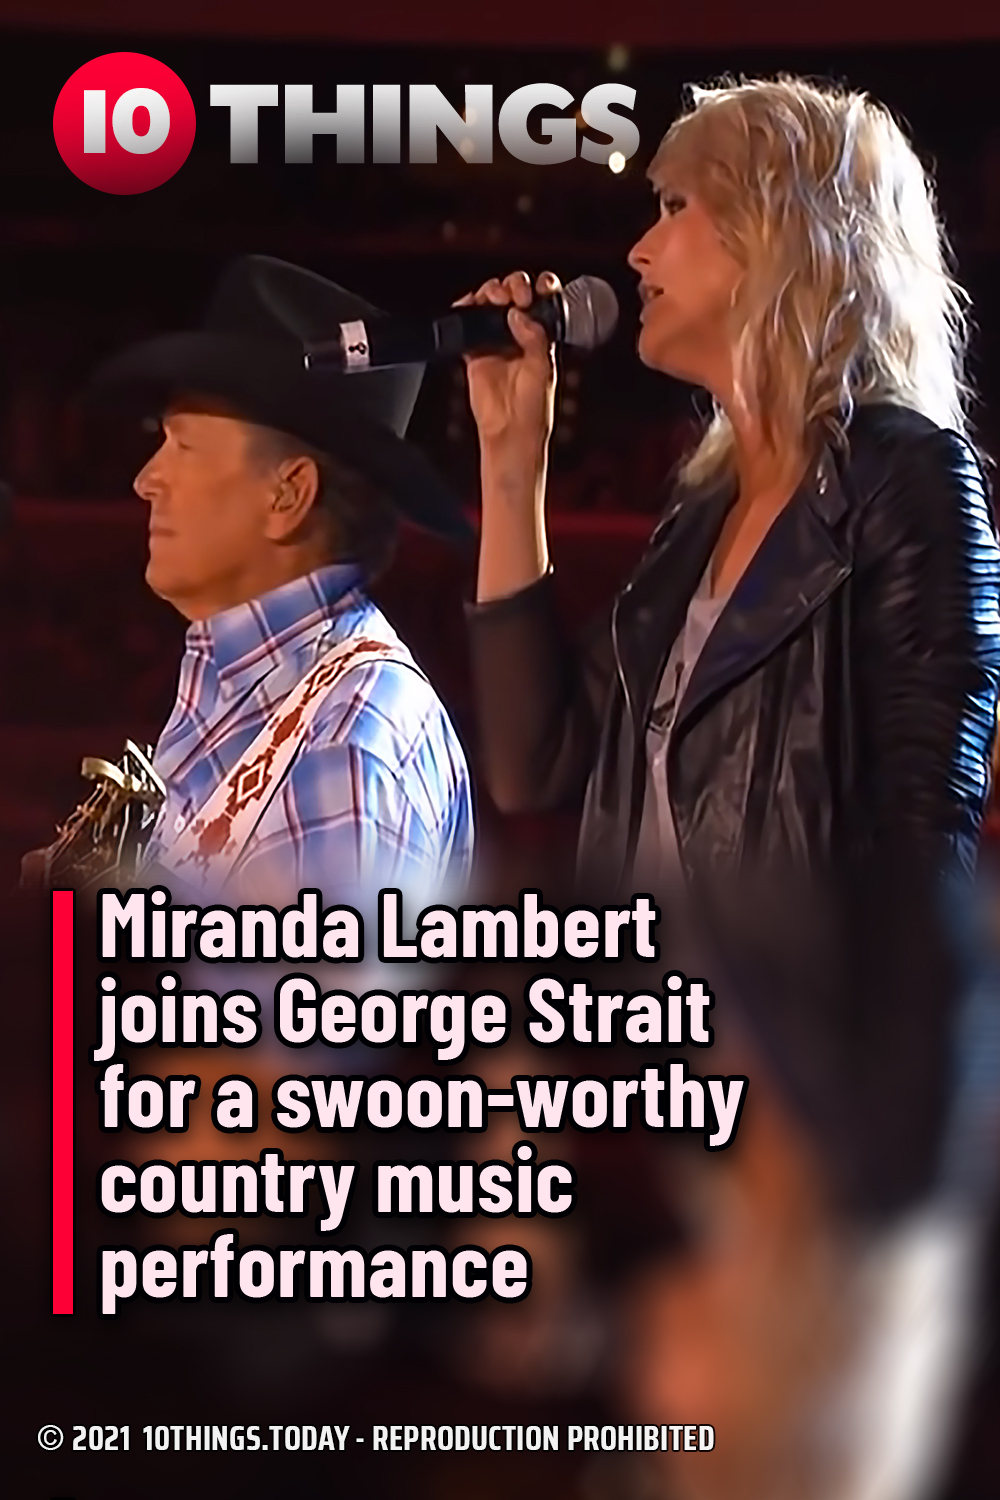 Miranda Lambert joins George Strait for a swoon-worthy country music performance